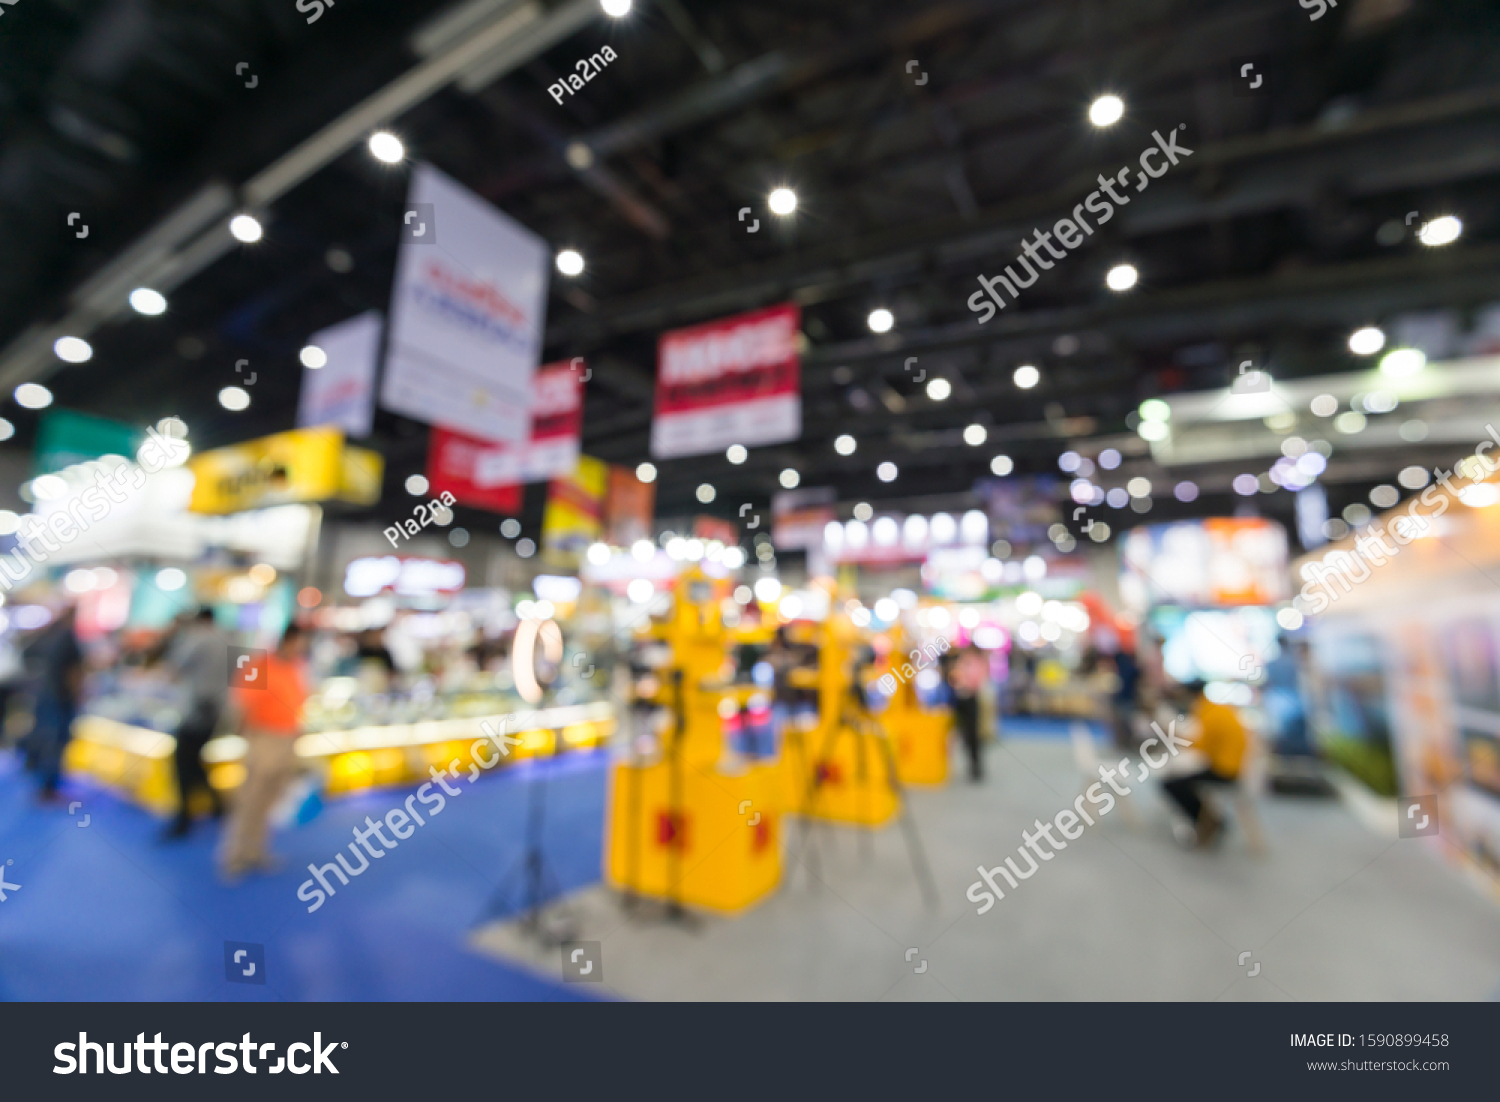 Abstract blur people in exhibition hall event trade show expo background. Large international exhibition, convention center, Business marketing and MICE industry concept. #1590899458